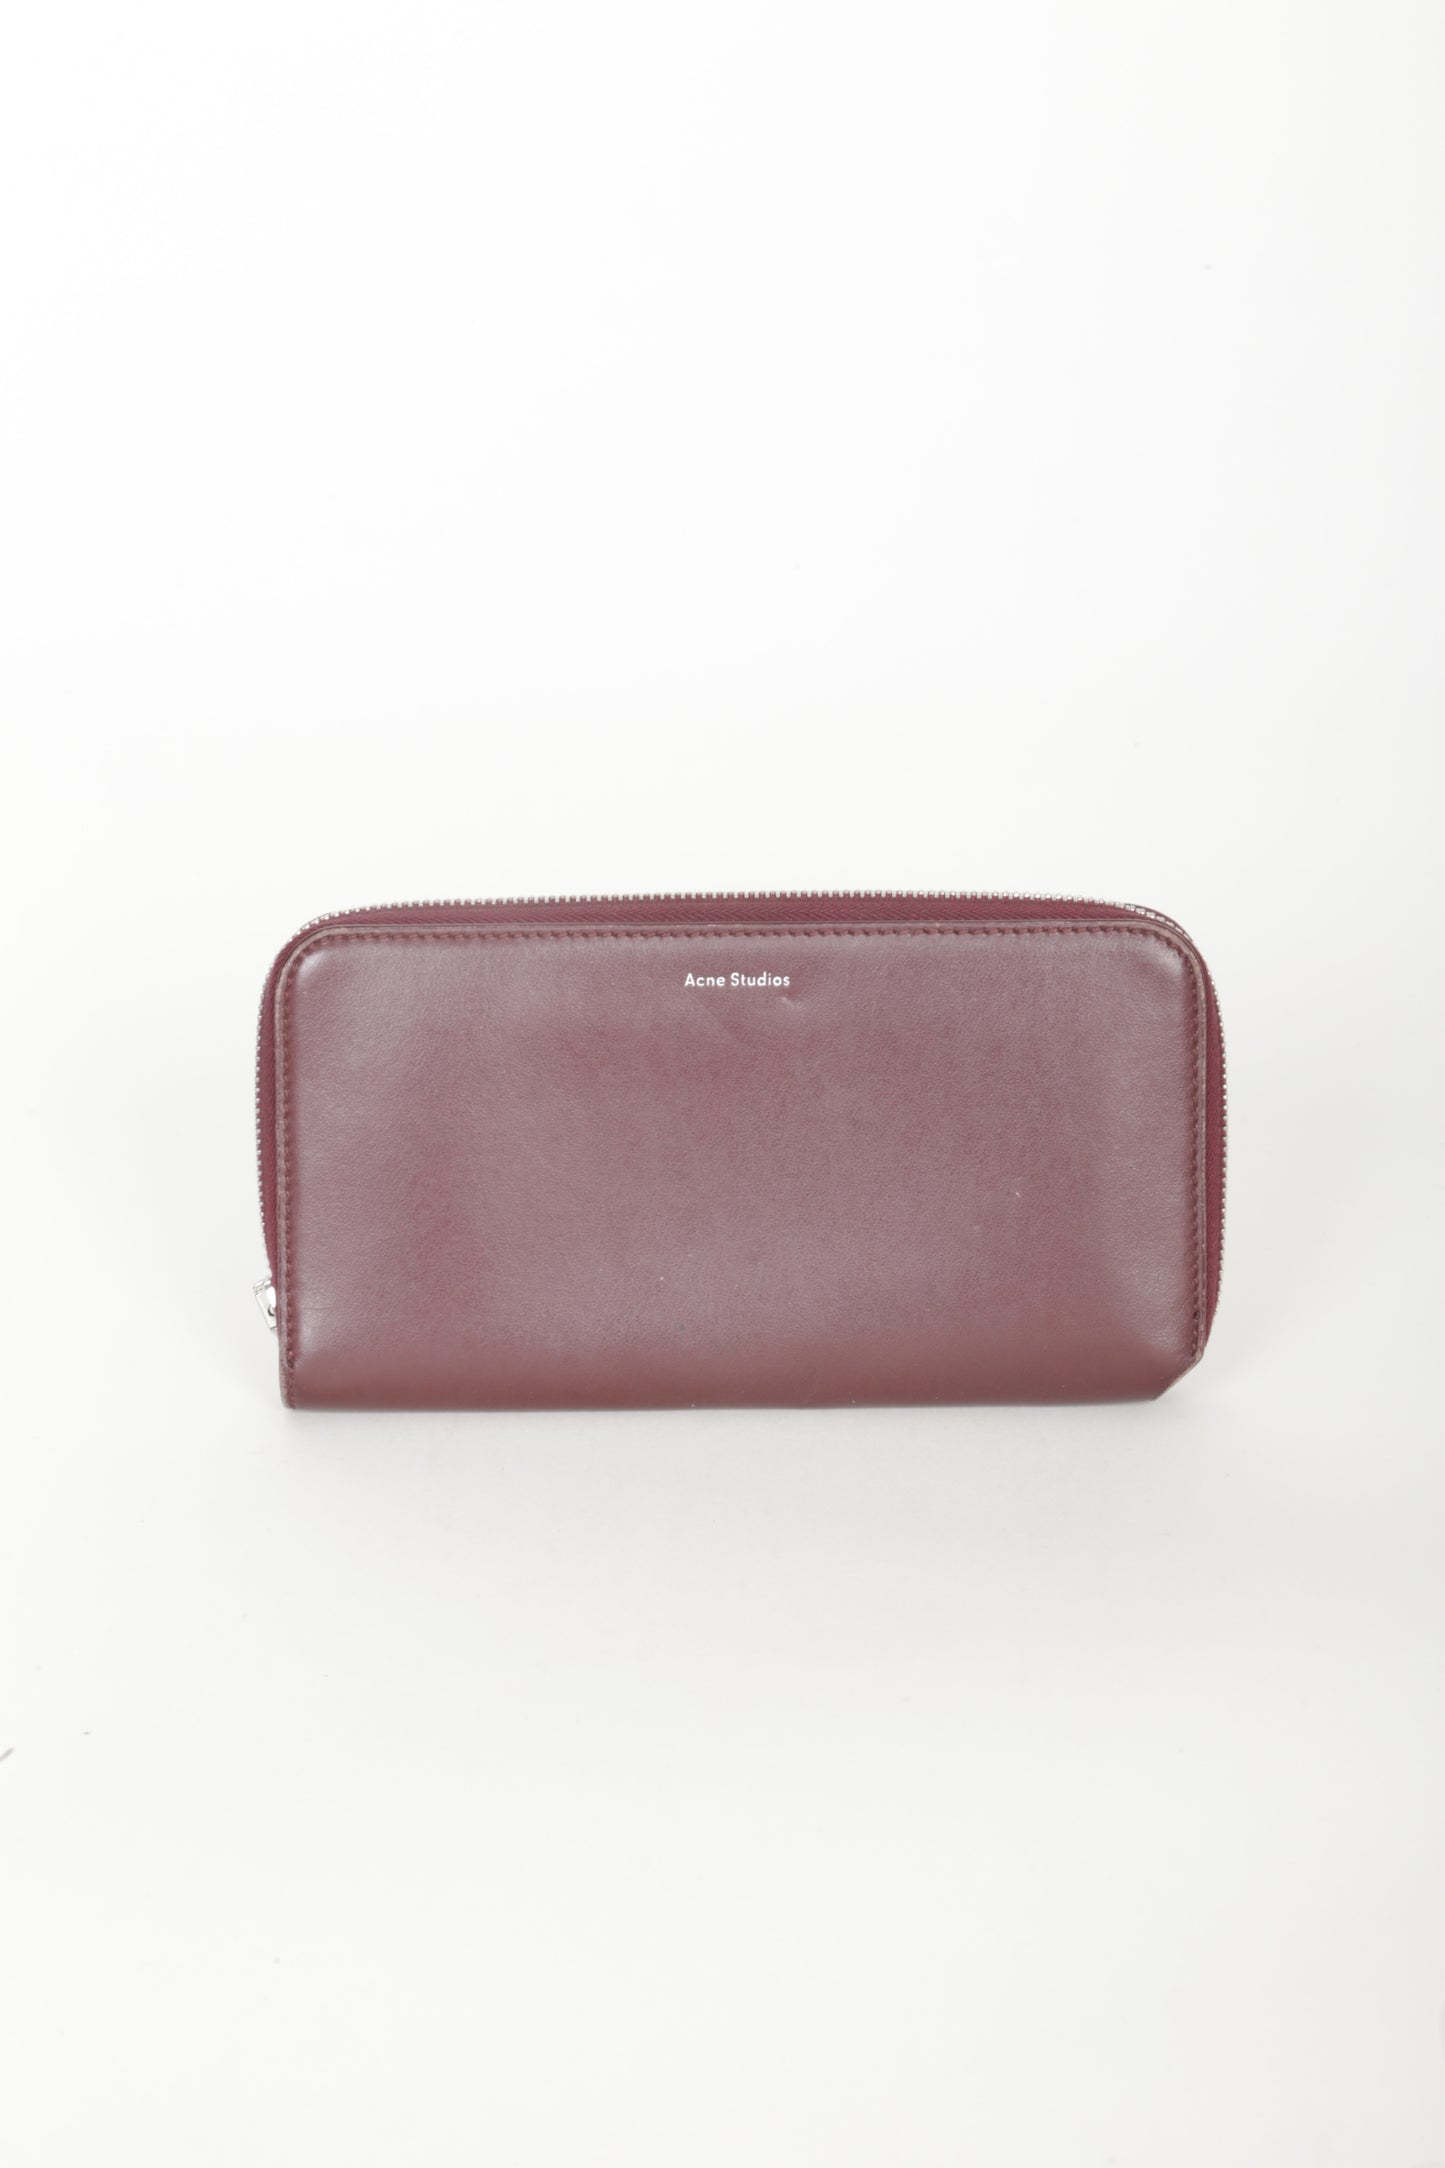 Acne Studios Womens Red Wallet Size O/S